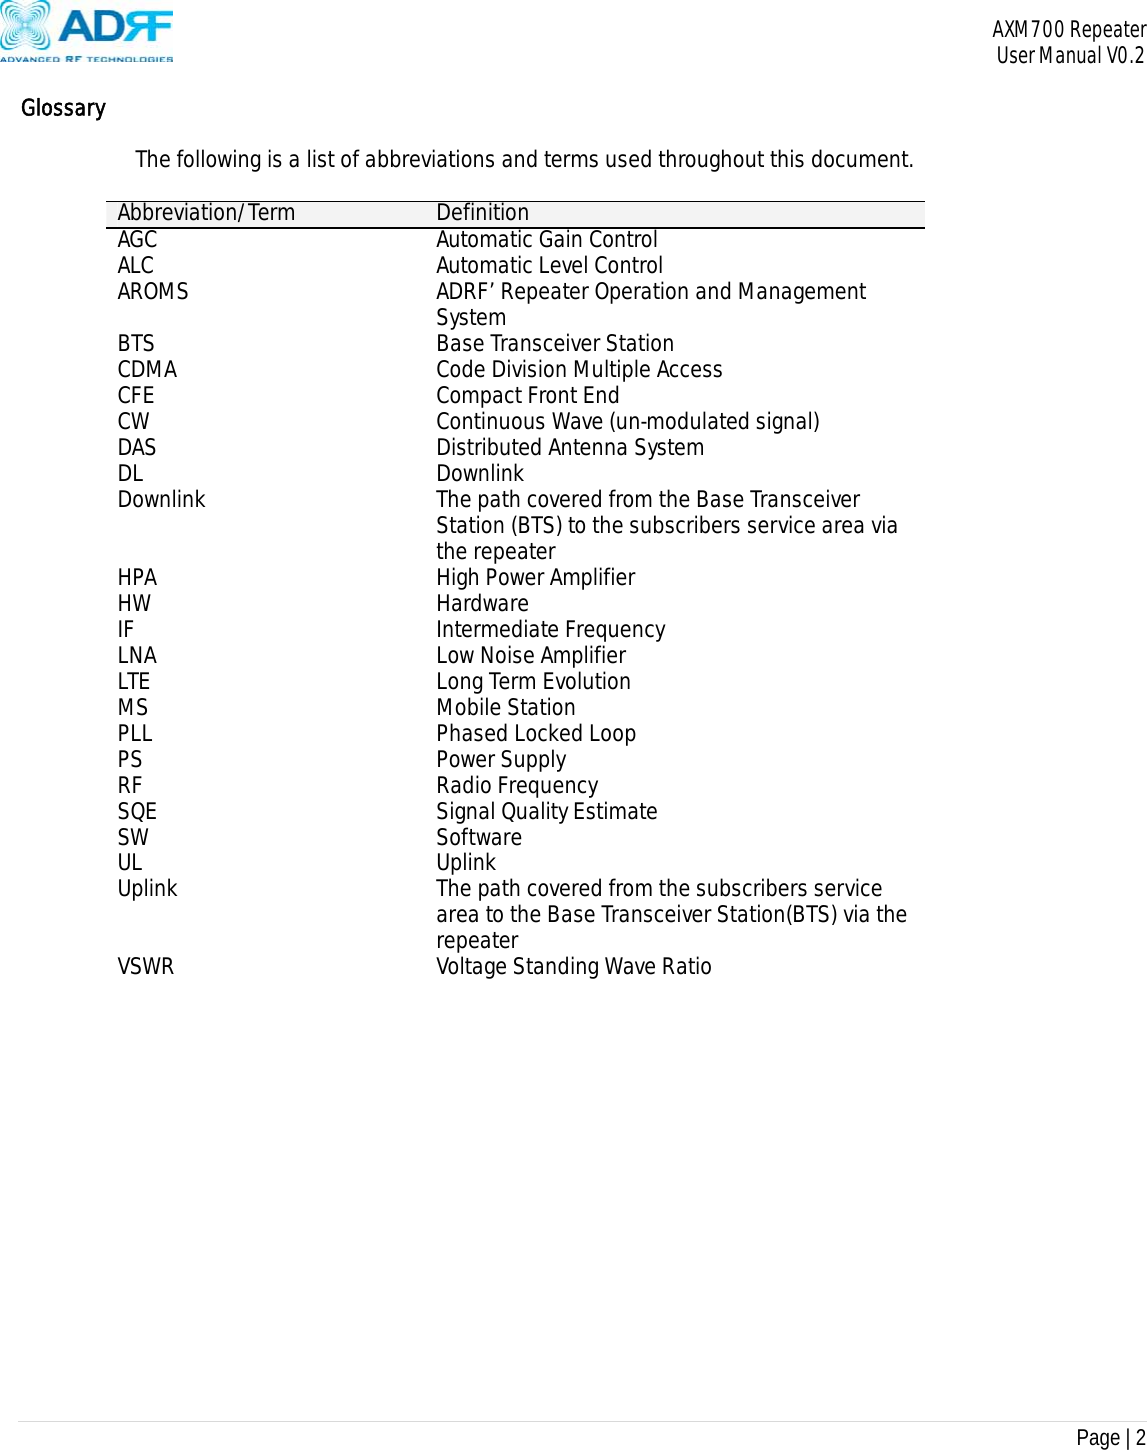 AXM700 Repeater     User Manual V0.2  Page | 2    Glossary The following is a list of abbreviations and terms used throughout this document.  Abbreviation/Term  DefinitionAGC Automatic Gain ControlALC  Automatic Level ControlAROMS  ADRF’ Repeater Operation and Management System BTS  Base Transceiver StationCDMA  Code Division Multiple AccessCFE  Compact Front EndCW  Continuous Wave (un-modulated signal)DAS  Distributed Antenna SystemDL DownlinkDownlink  The path covered from the Base Transceiver Station (BTS) to the subscribers service area via the repeater HPA  High Power AmplifierHW HardwareIF Intermediate FrequencyLNA LTE  Low Noise AmplifierLong Term Evolution MS Mobile Station PLL  Phased Locked LoopPS Power SupplyRF Radio FrequencySQE  Signal Quality EstimateSW SoftwareUL UplinkUplink  The path covered from the subscribers service area to the Base Transceiver Station(BTS) via the repeater  VSWR  Voltage Standing Wave Ratio 